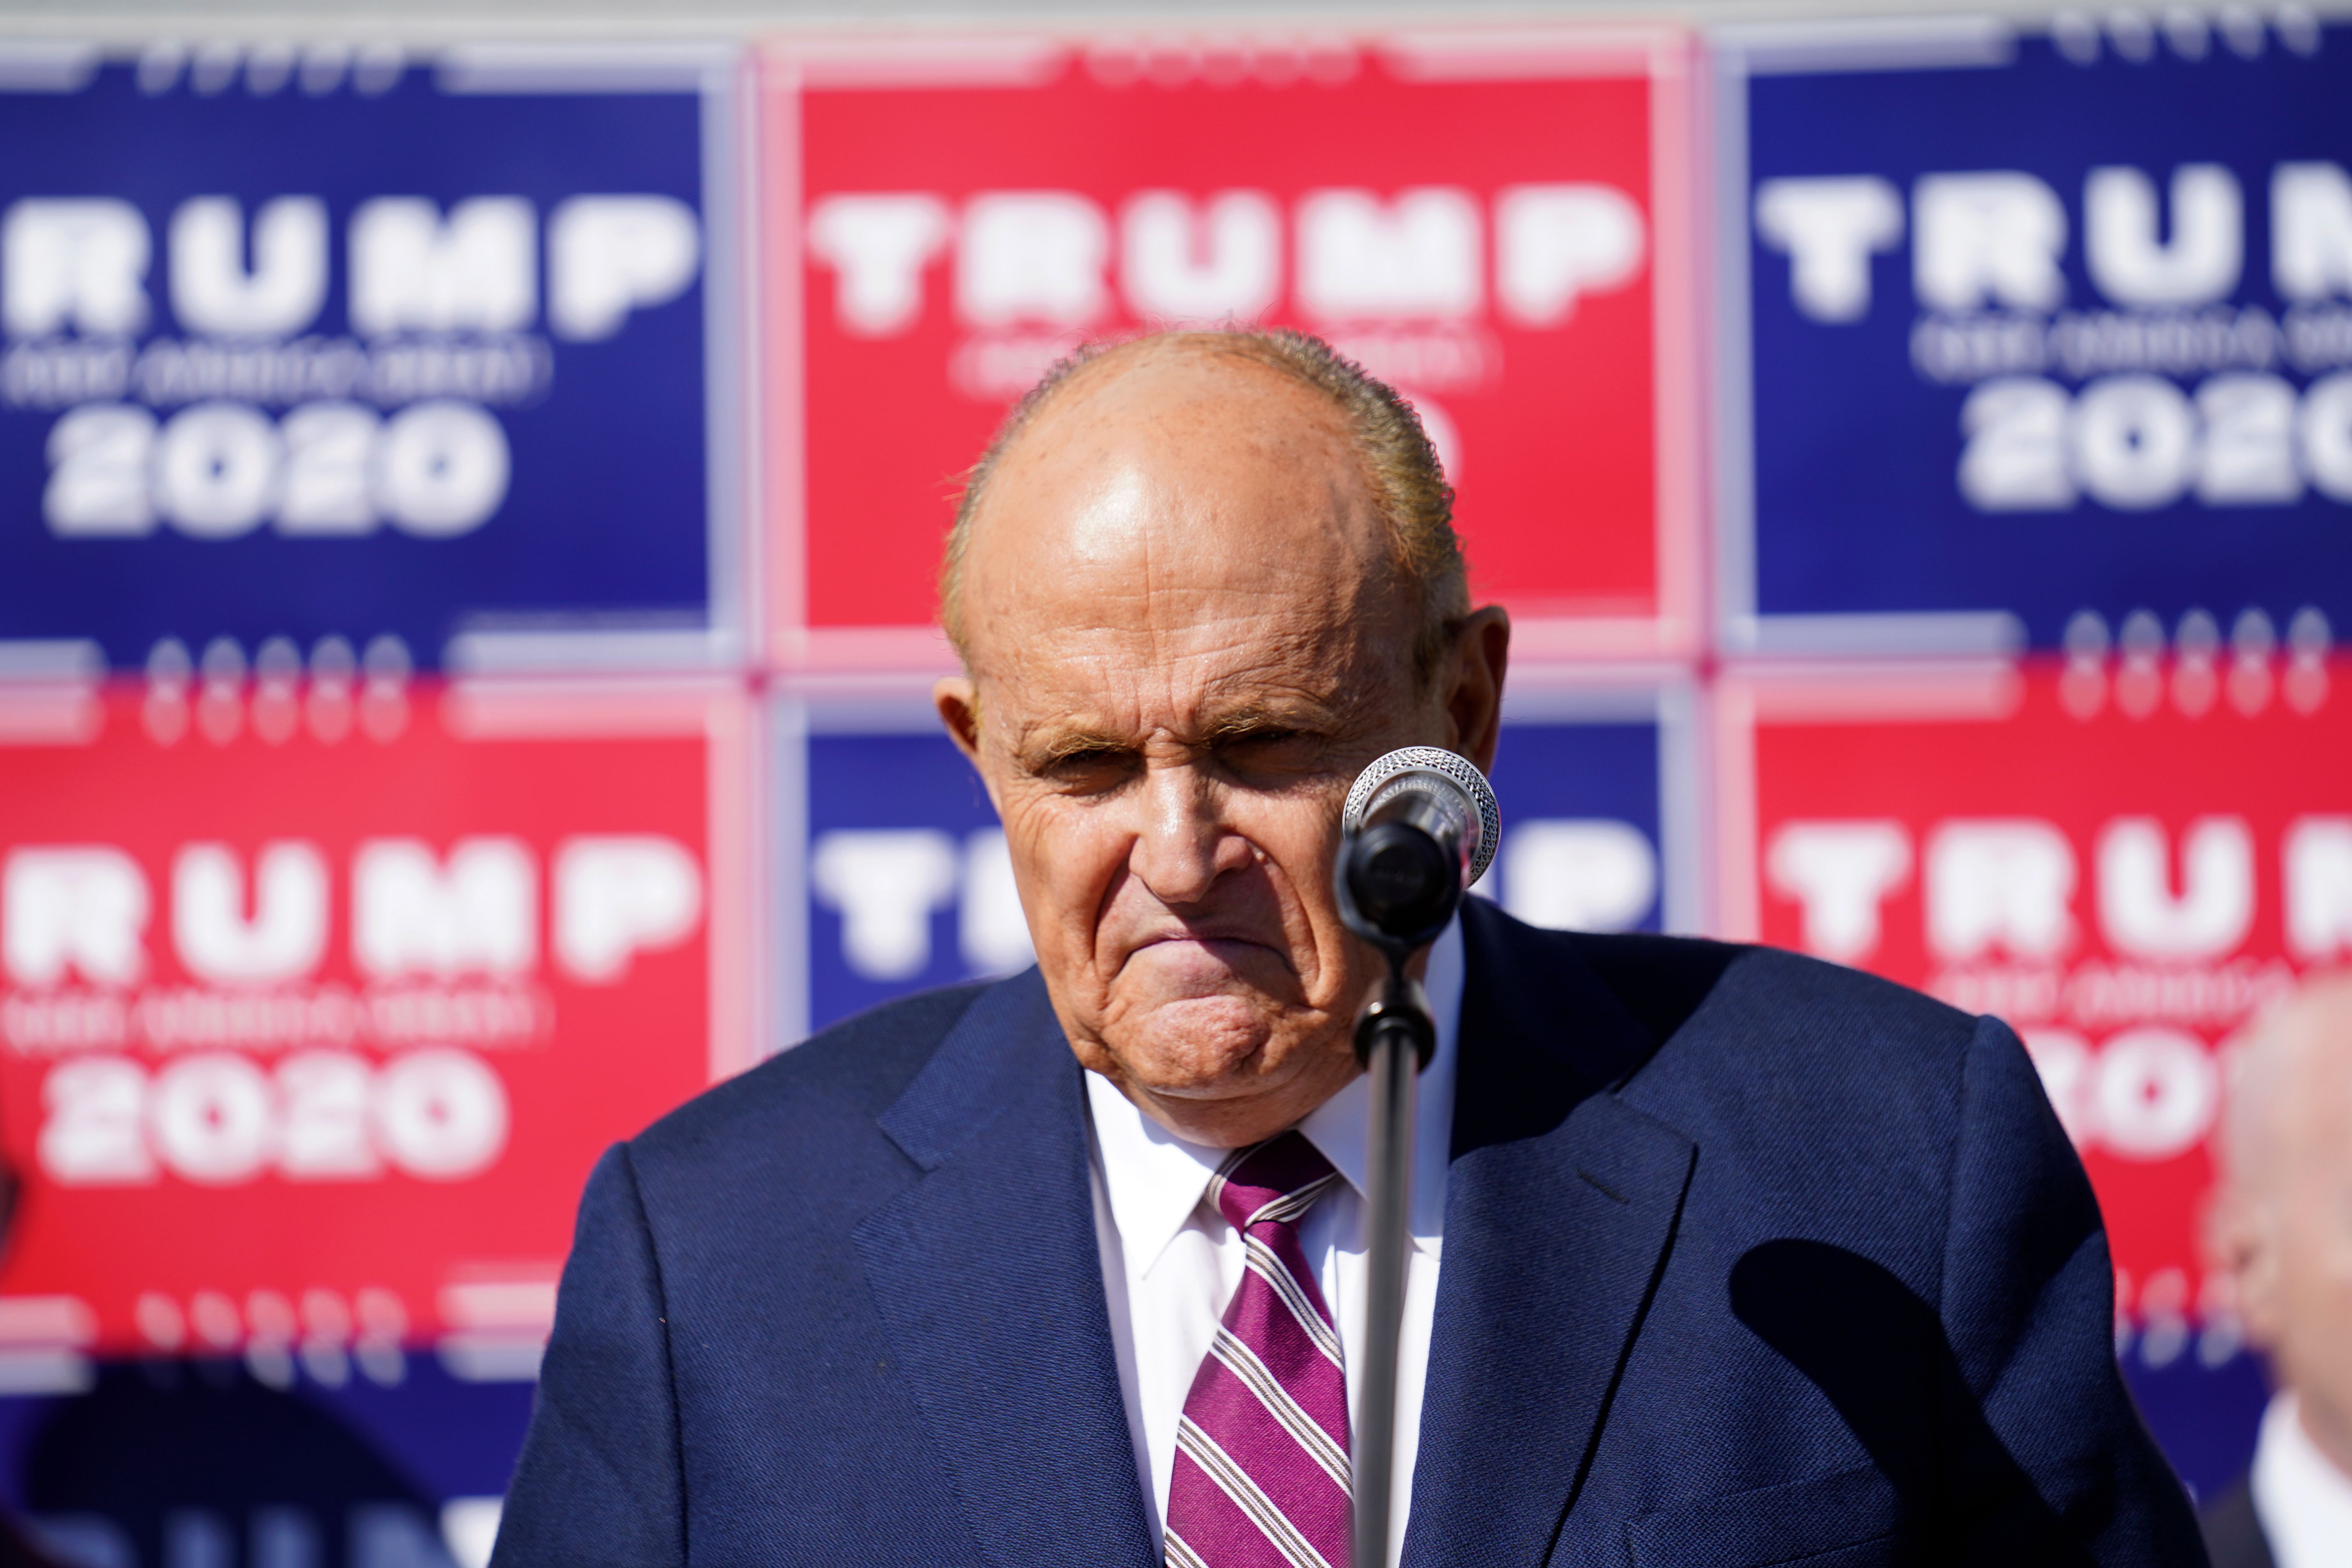 Rudy Giuliani said a civil rights case was being filed in federal court